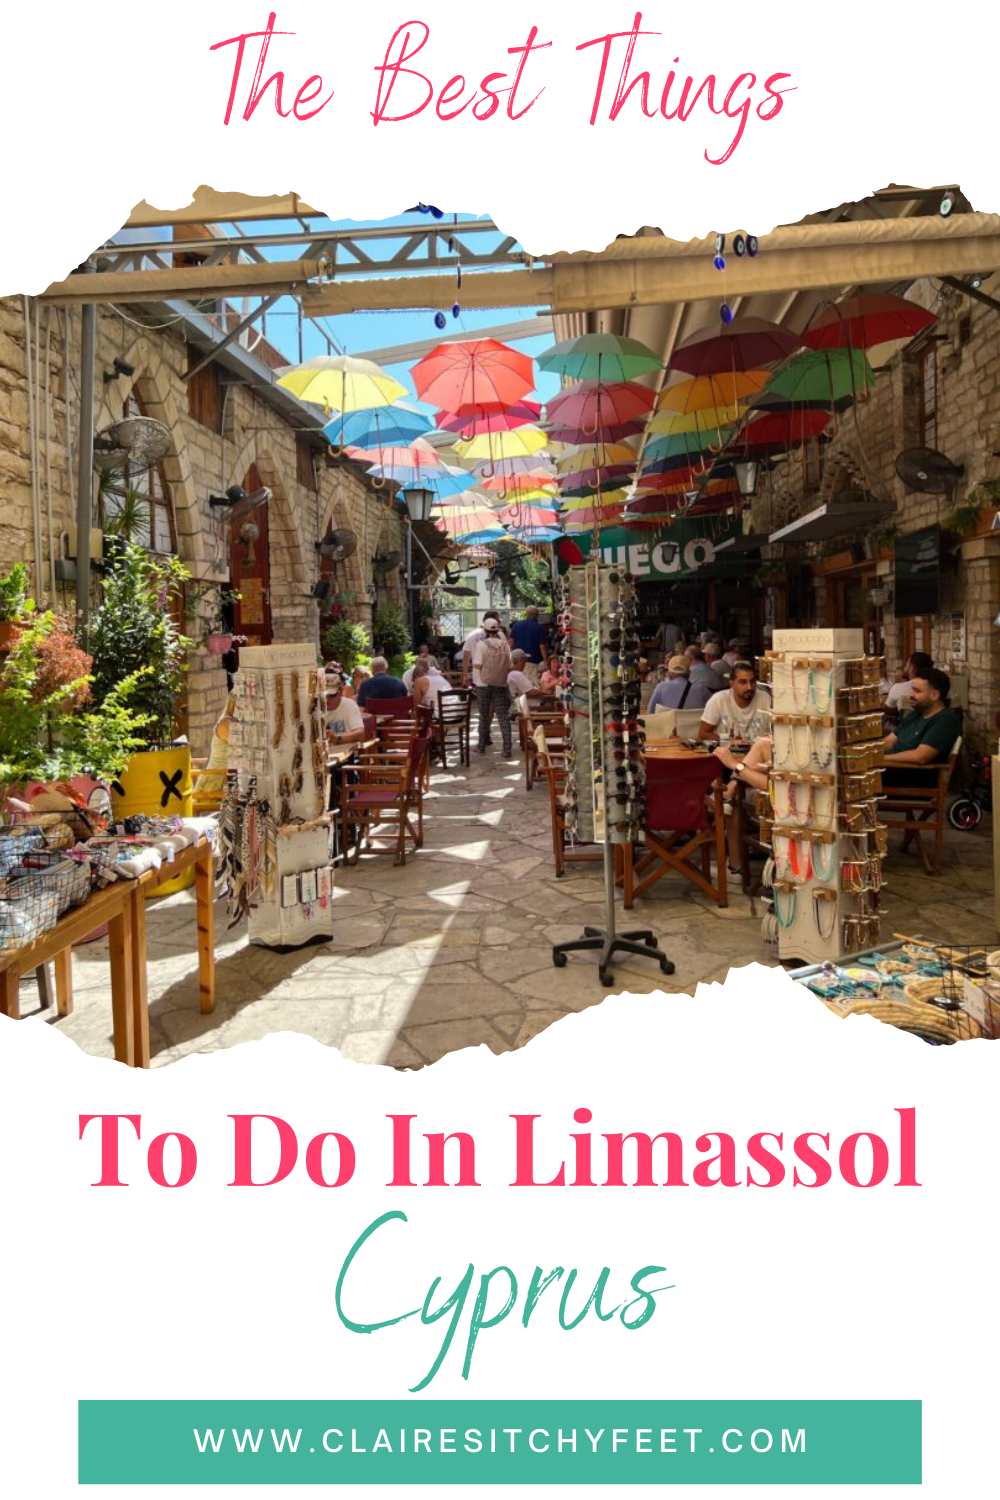 things to do in limassol,limassol cyprus,limassol,cyprus,The Best Things to Do In Limassol Cyprus,holiday in cyprus